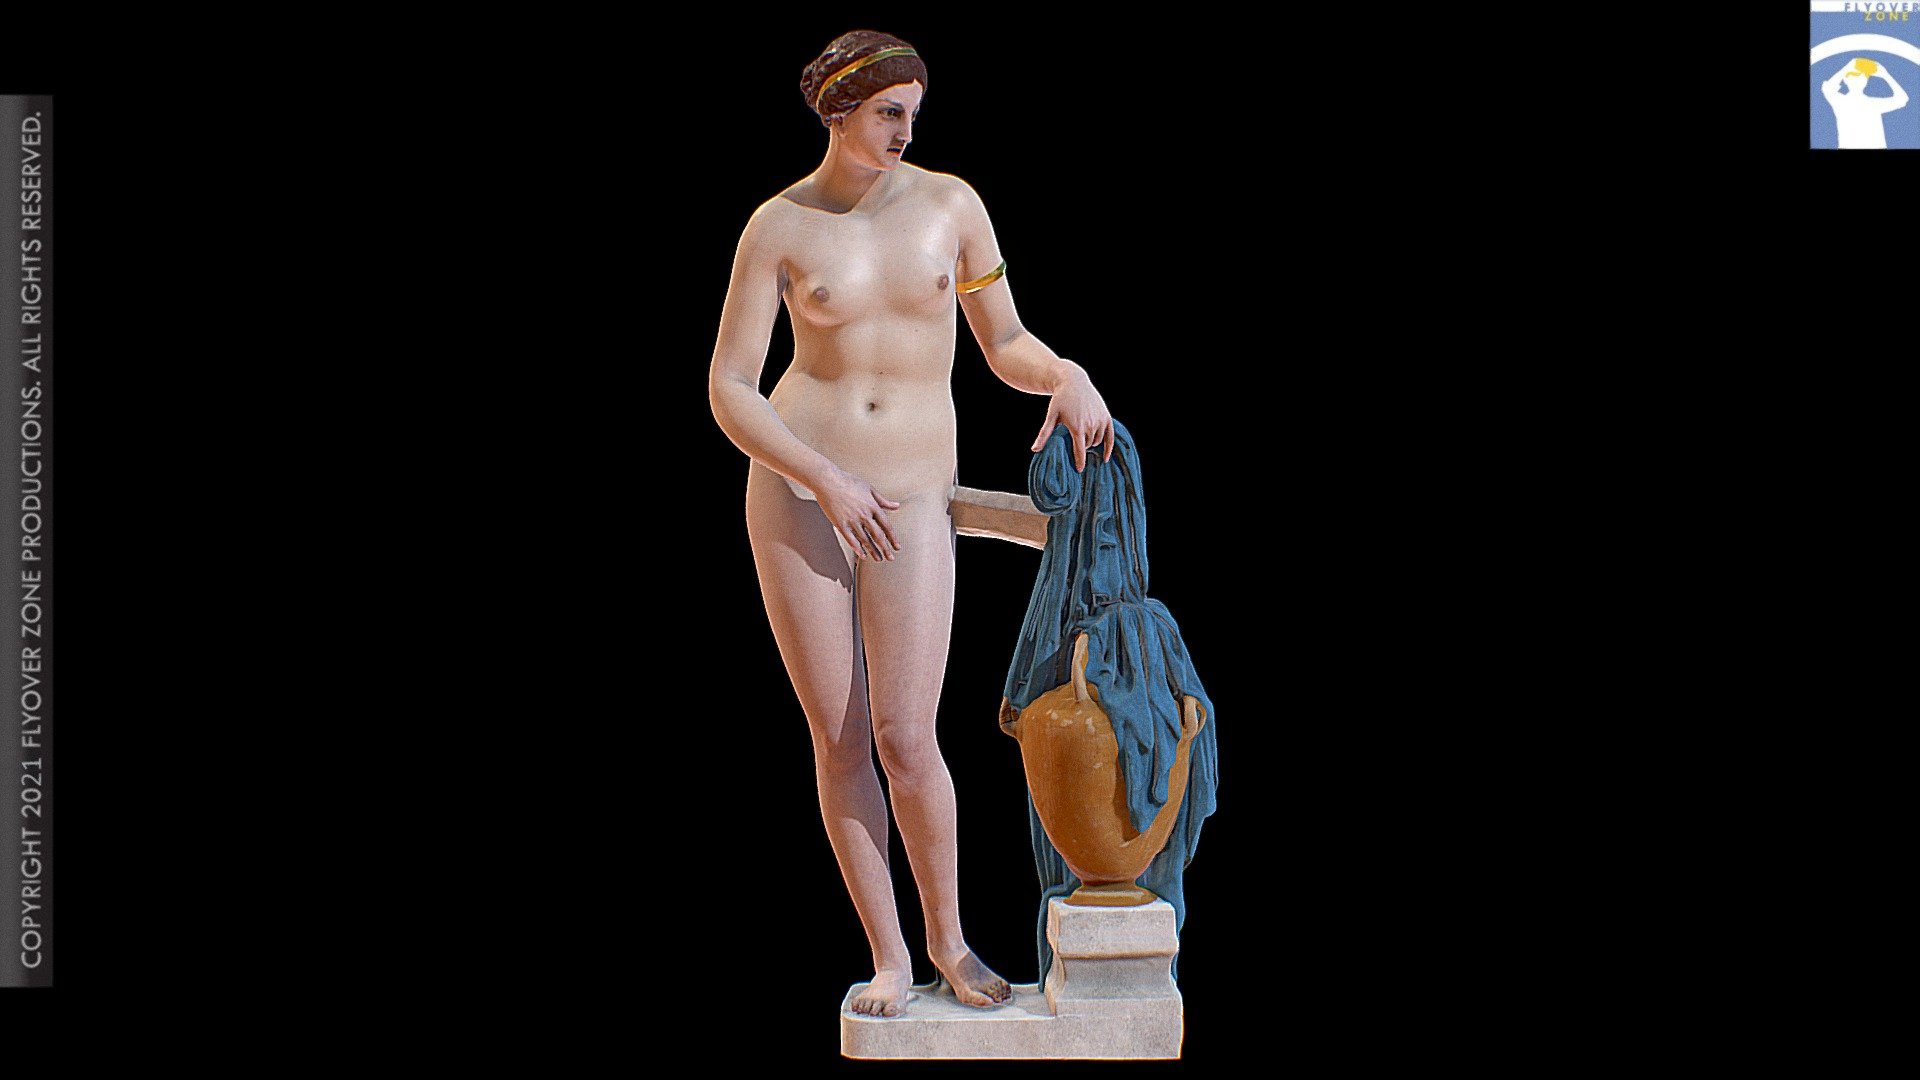 Name: Aphrodite of Cnidus
Material: cast (plaster of Paris)
Format: Statue
Museum: Courtesy Museo dell’Arte Classica, Sapienza University, Rome
Inventory number: 741
Museum of original: Vatican Museums. Note that the cast has been modified by G. E. Rizzo.
Bibliography: G. Spinola, Il Museo Pio-Clementino (1999) vol. 2, page 167
Photographer / modeler: Davide Angheleddu
Restoration by: Mohamed Abdelaziz
More info: https://sketchfab.com/3d-models/aphrodite-of-cnidus-a1ca39e9fba84686bf919b87f11af9d4
Copyright 2019 Flyover Zone Productions. All rights reserved.
 - Cnidian Aphrodite (restored) - 3D model by Flyover Zone (@FlyoverZone) 3d model